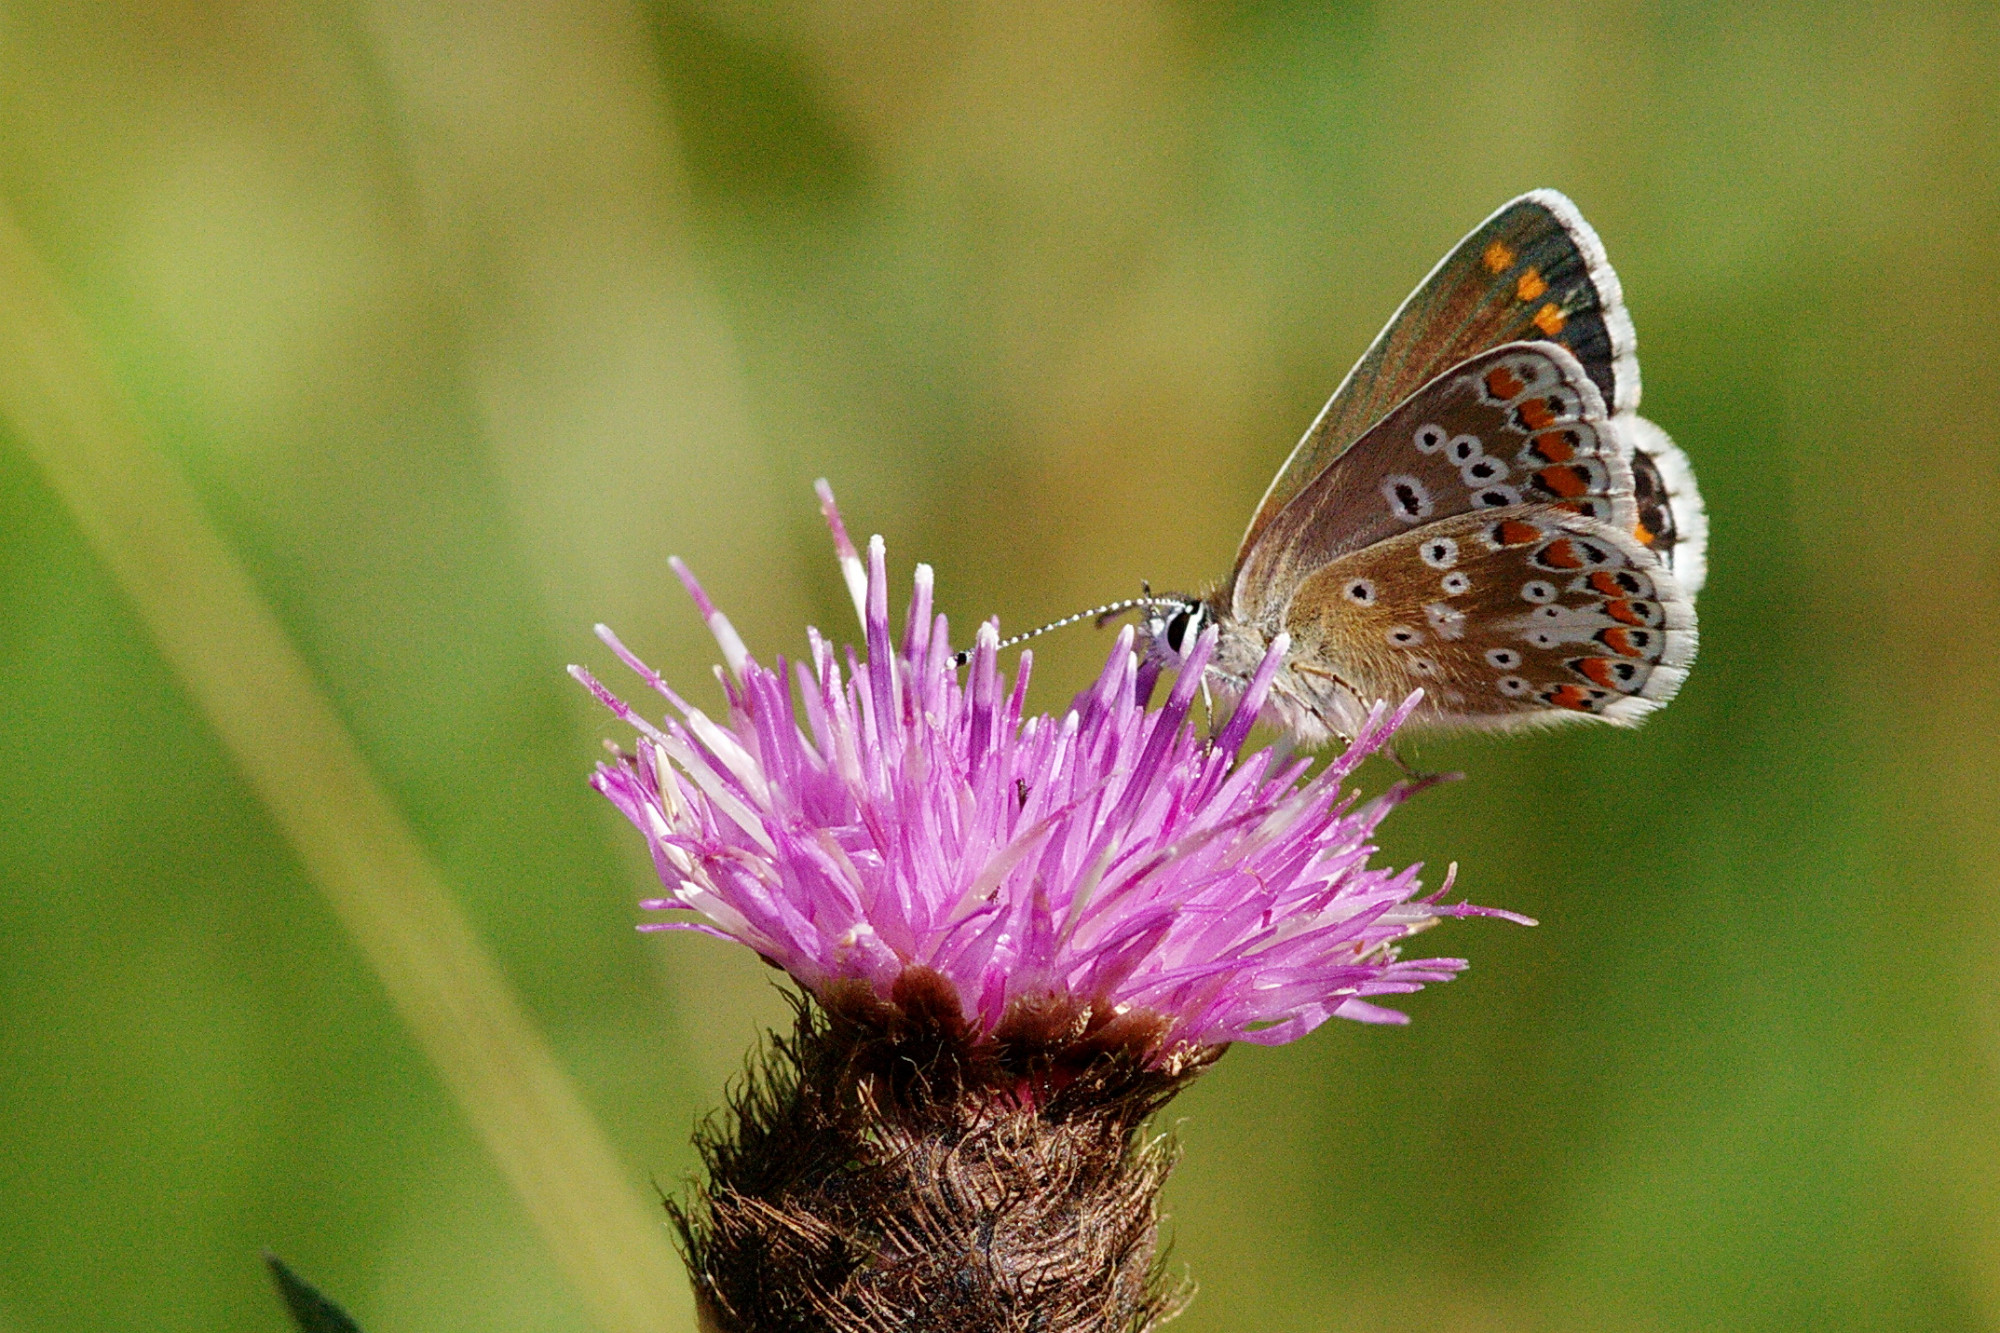 brown argus butterfly - brown wings with orange detail at the edge and a white border - perched on a thistle flower